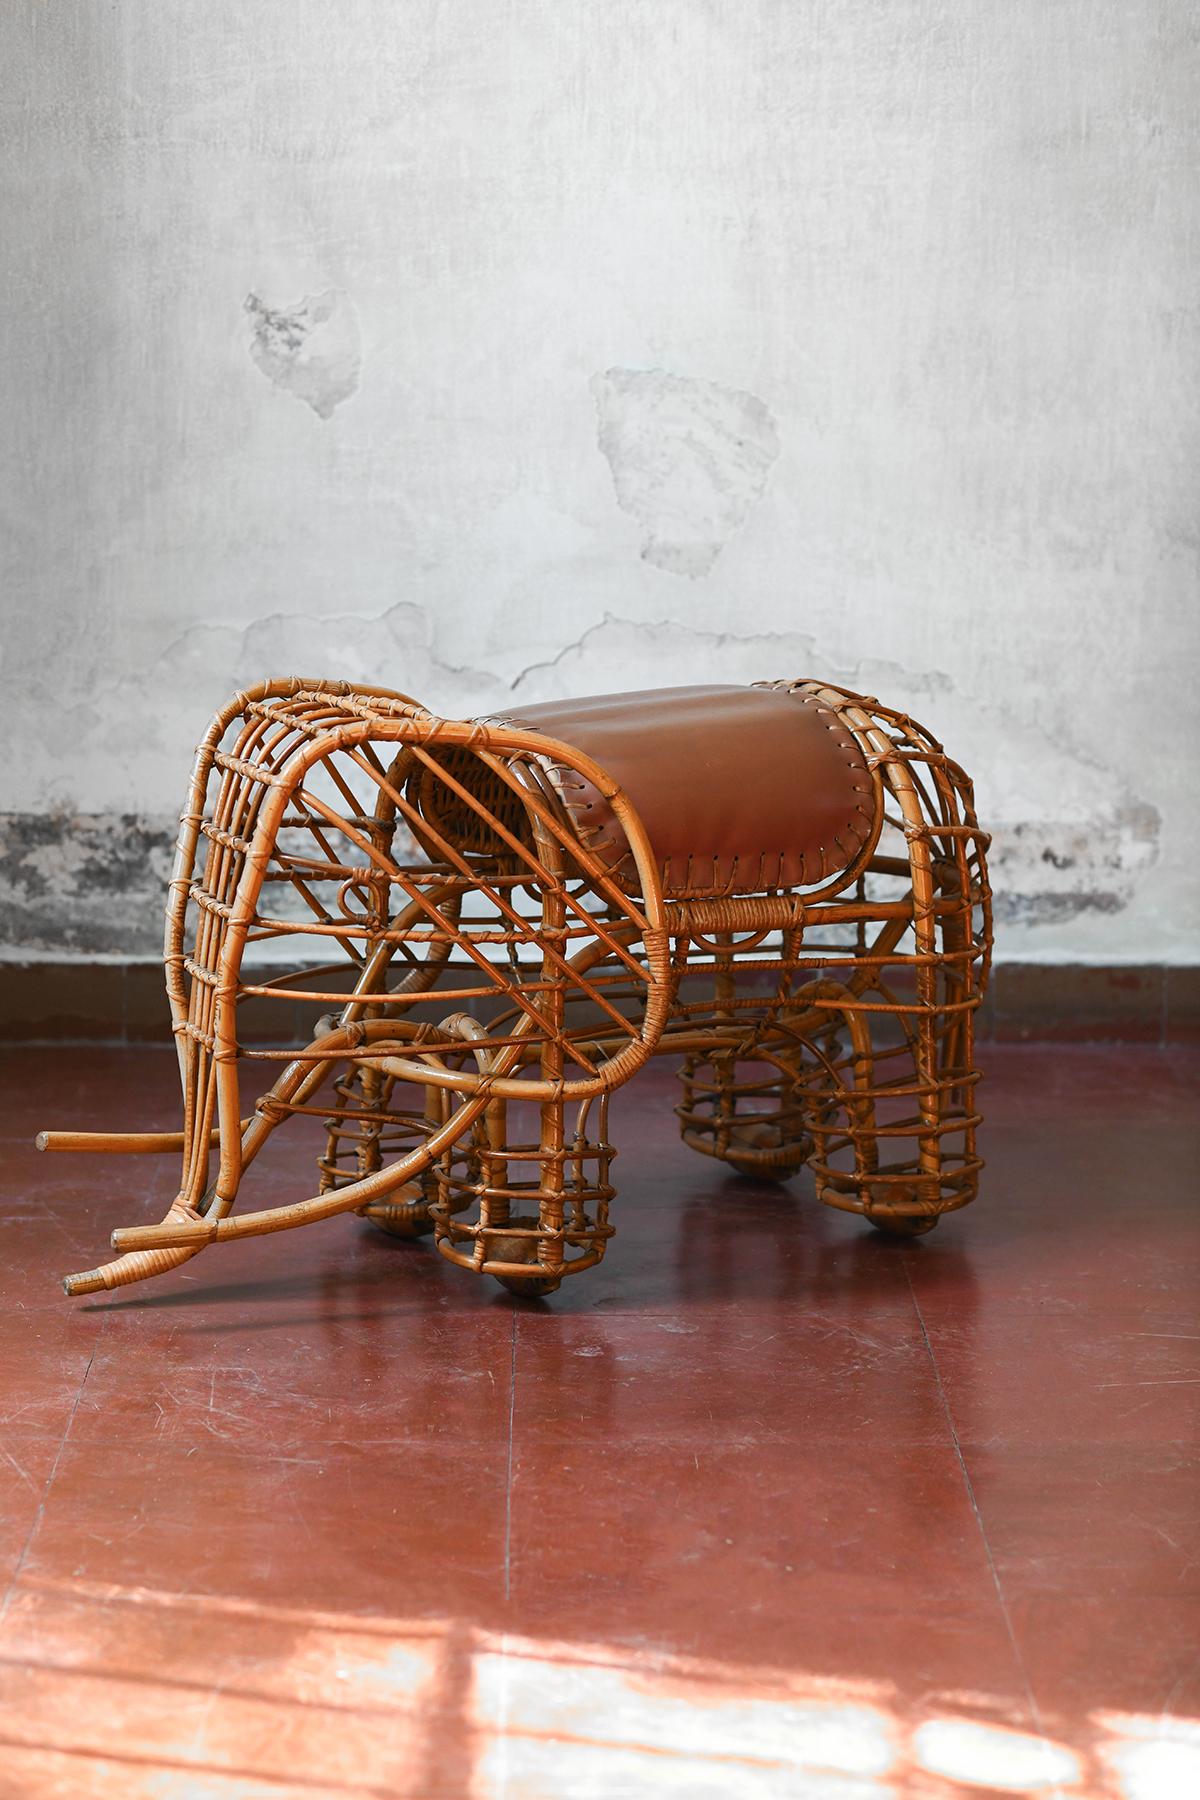 Elephant container in rush and leather with wooden wheels, 1970
Product details
Dimensions: 105 B x 55 H × 40 D cm